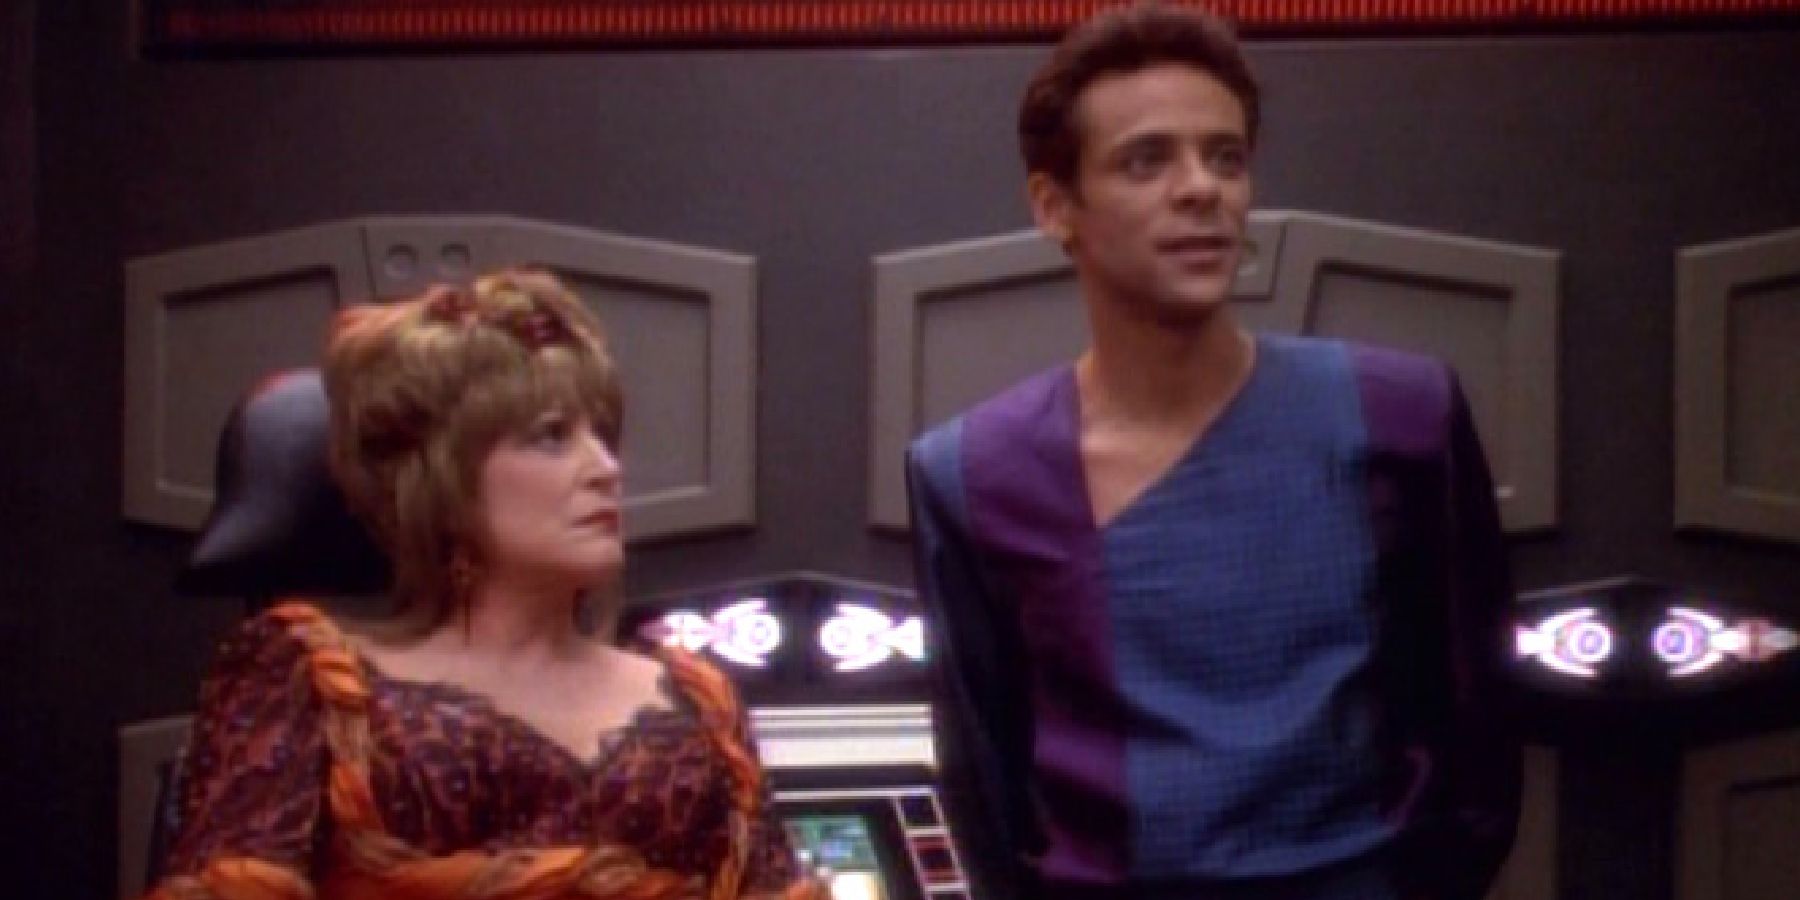 Lwaxana Troi gets her diagnosis from Dr. Bashir in sickbay